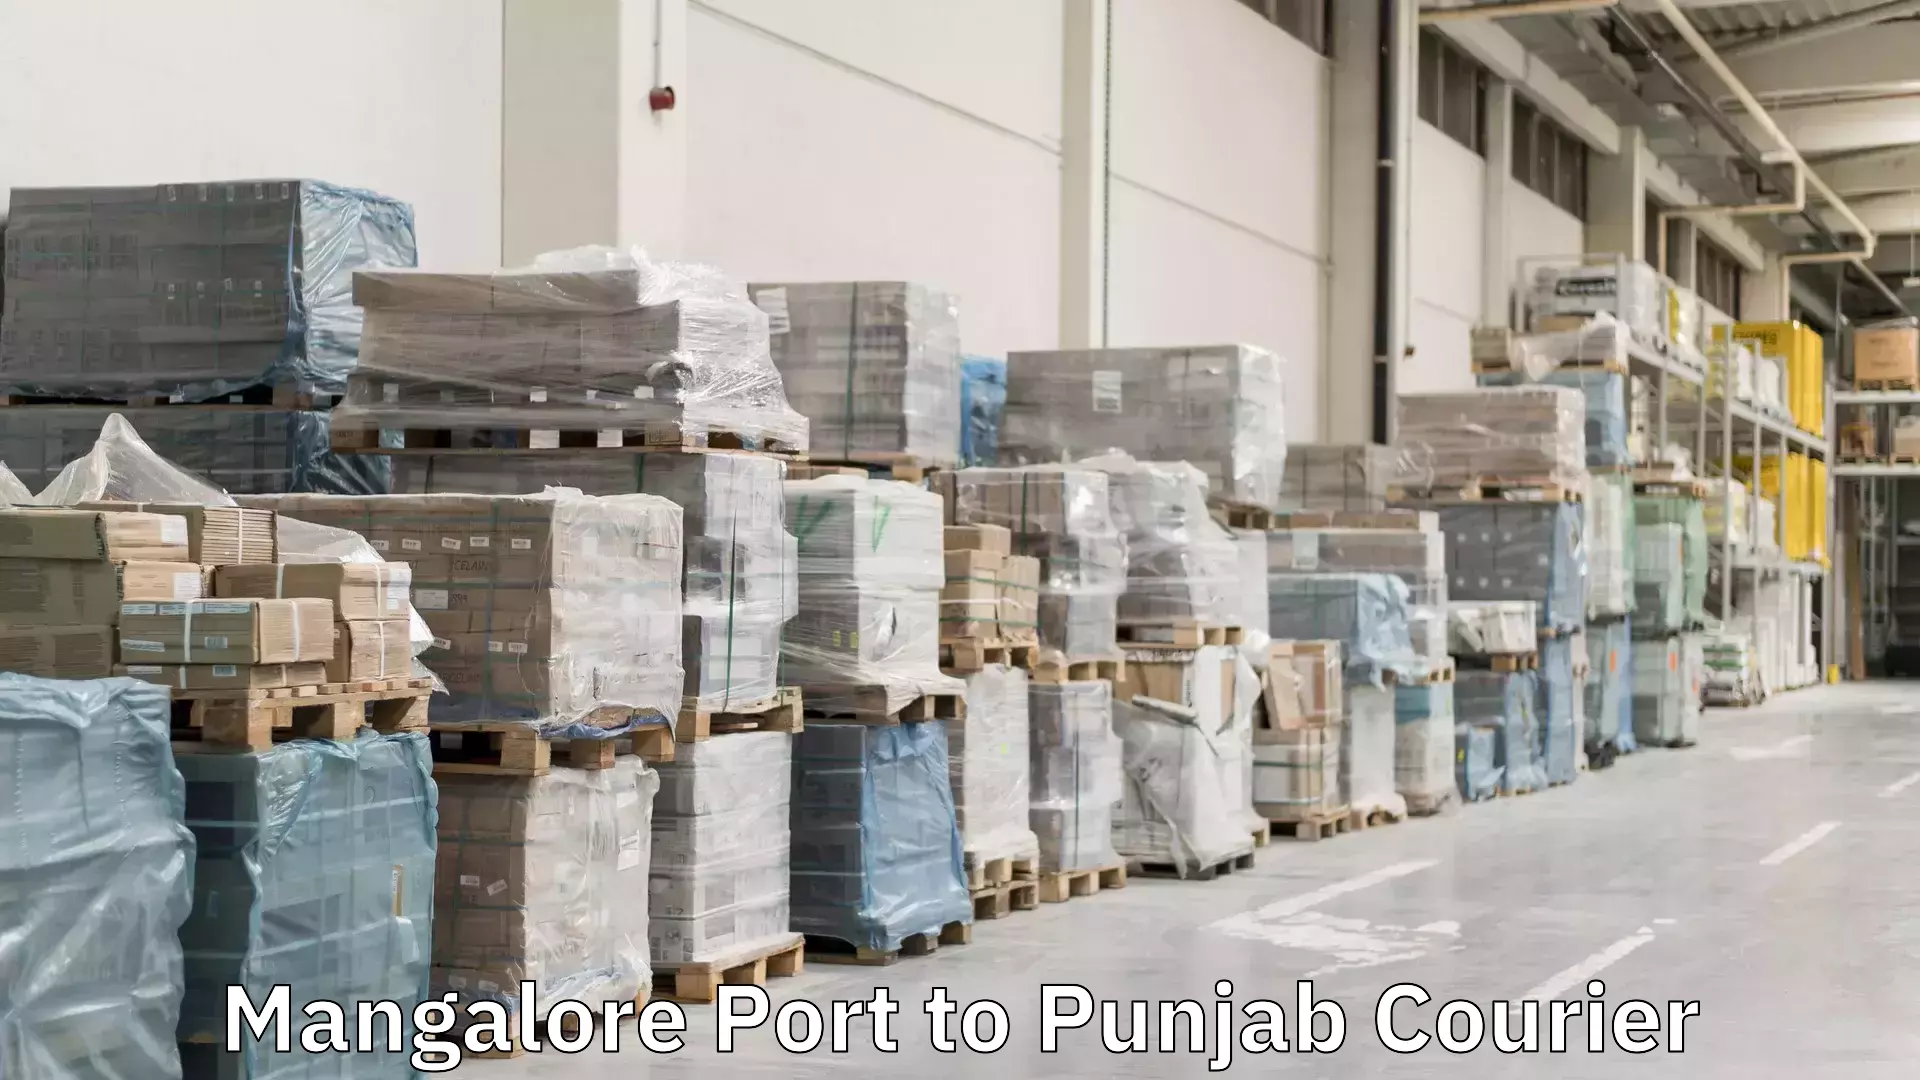 Package delivery network Mangalore Port to Punjab